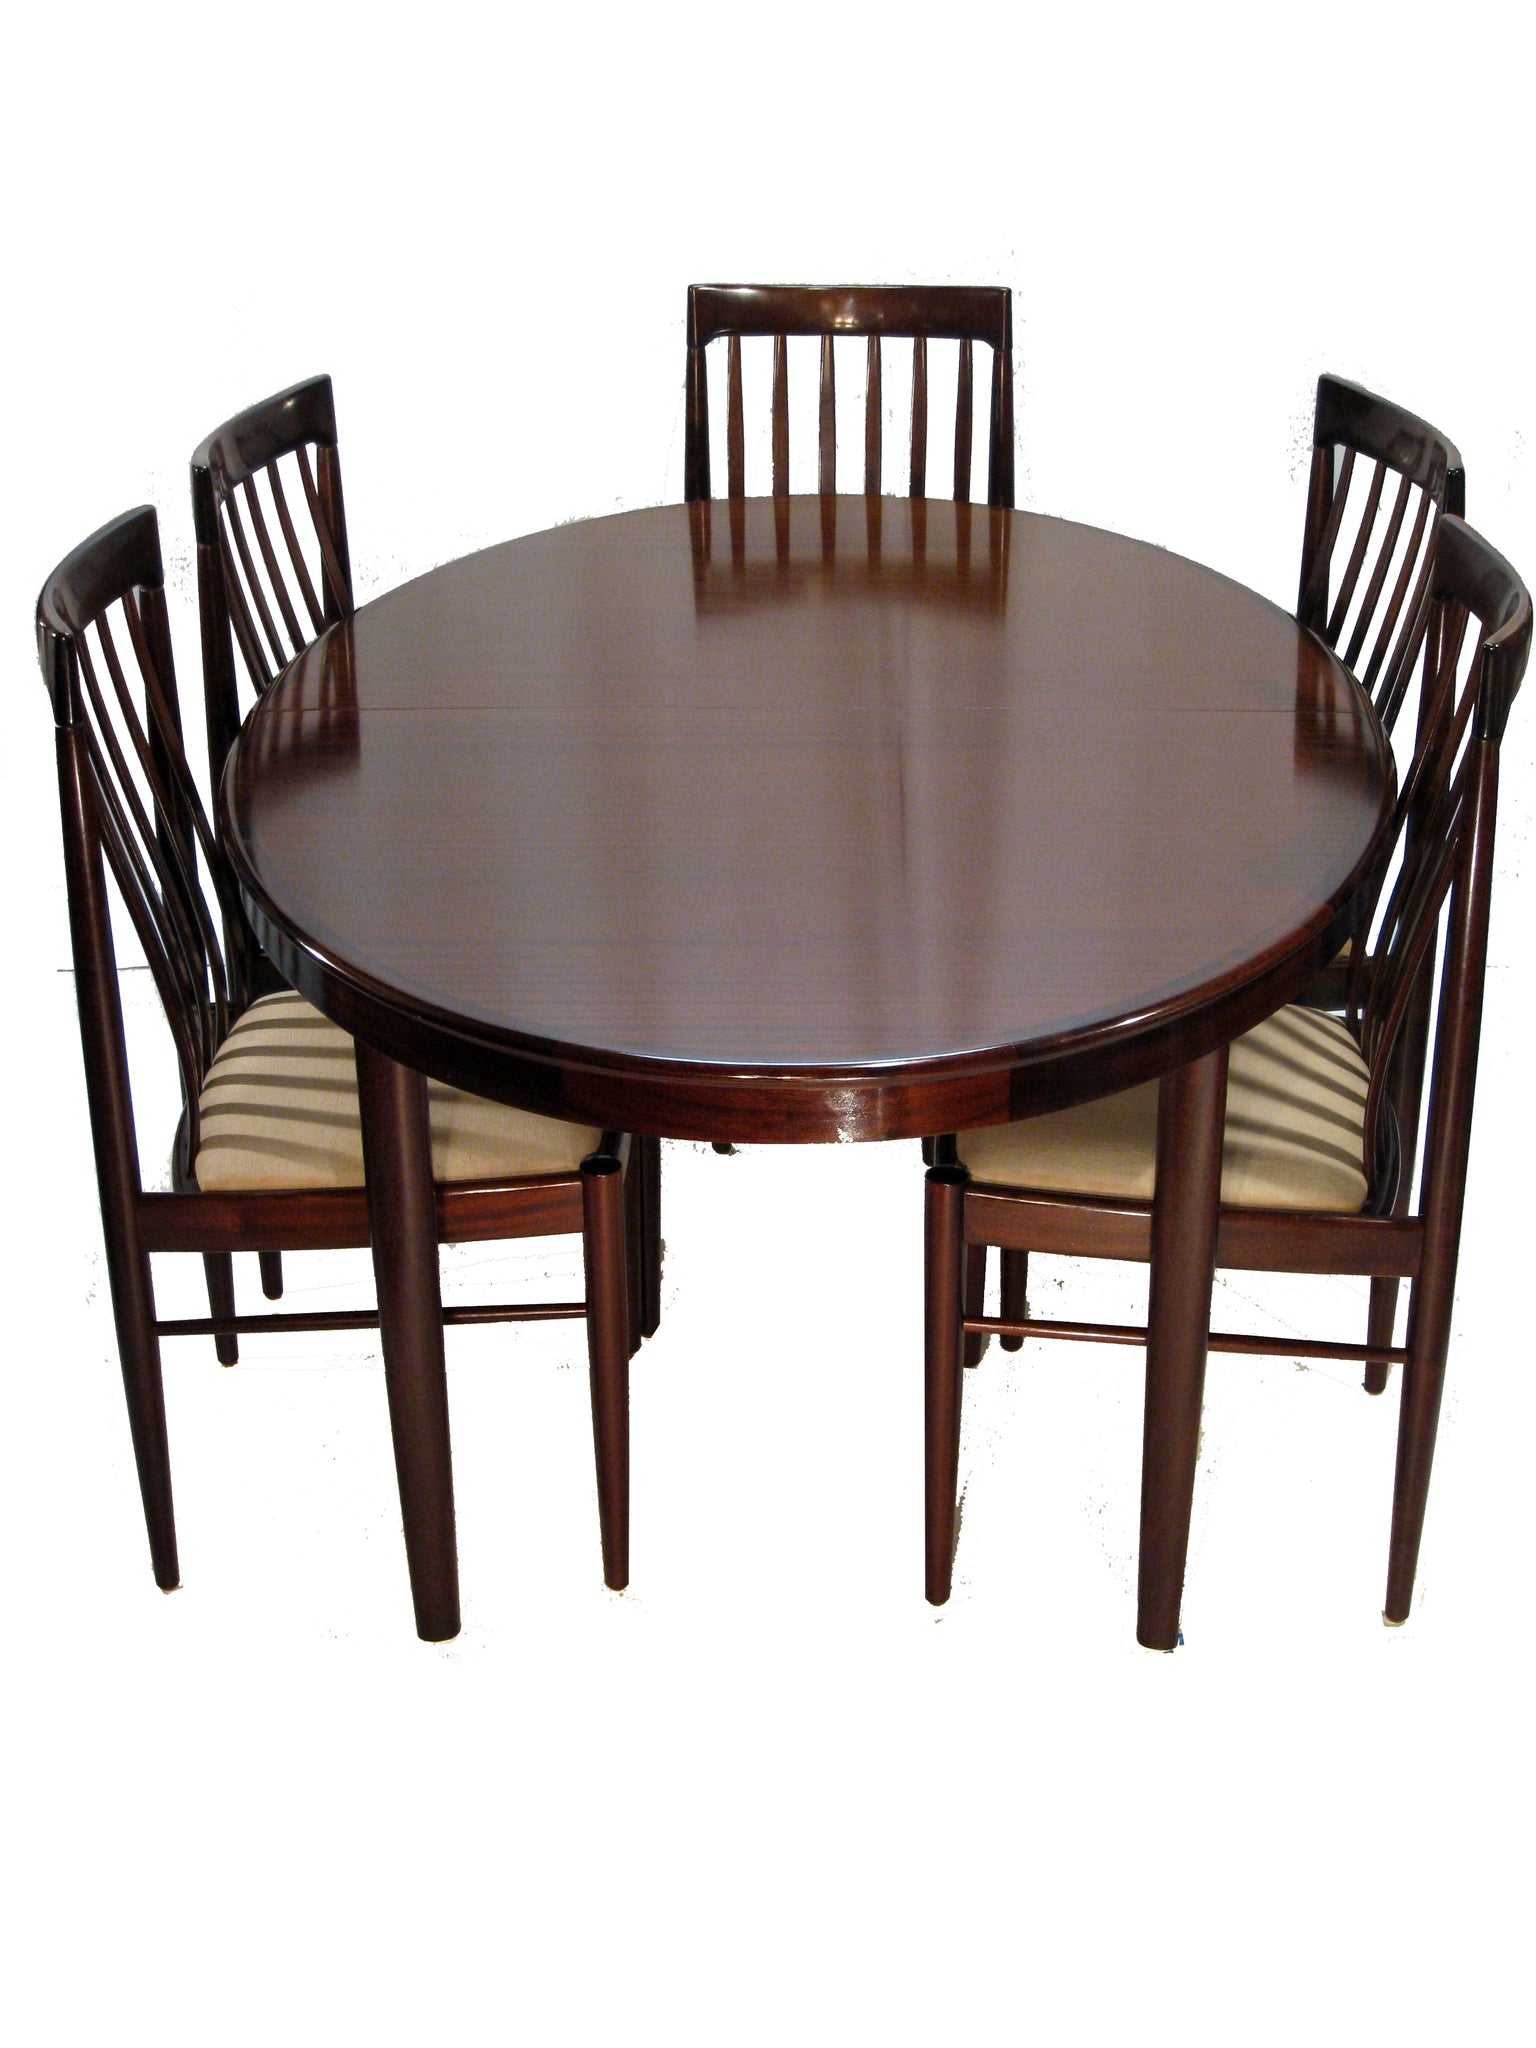 H.W. Klein Rosewood Dining Table w/ Two Leaves and Six Highback Chairs